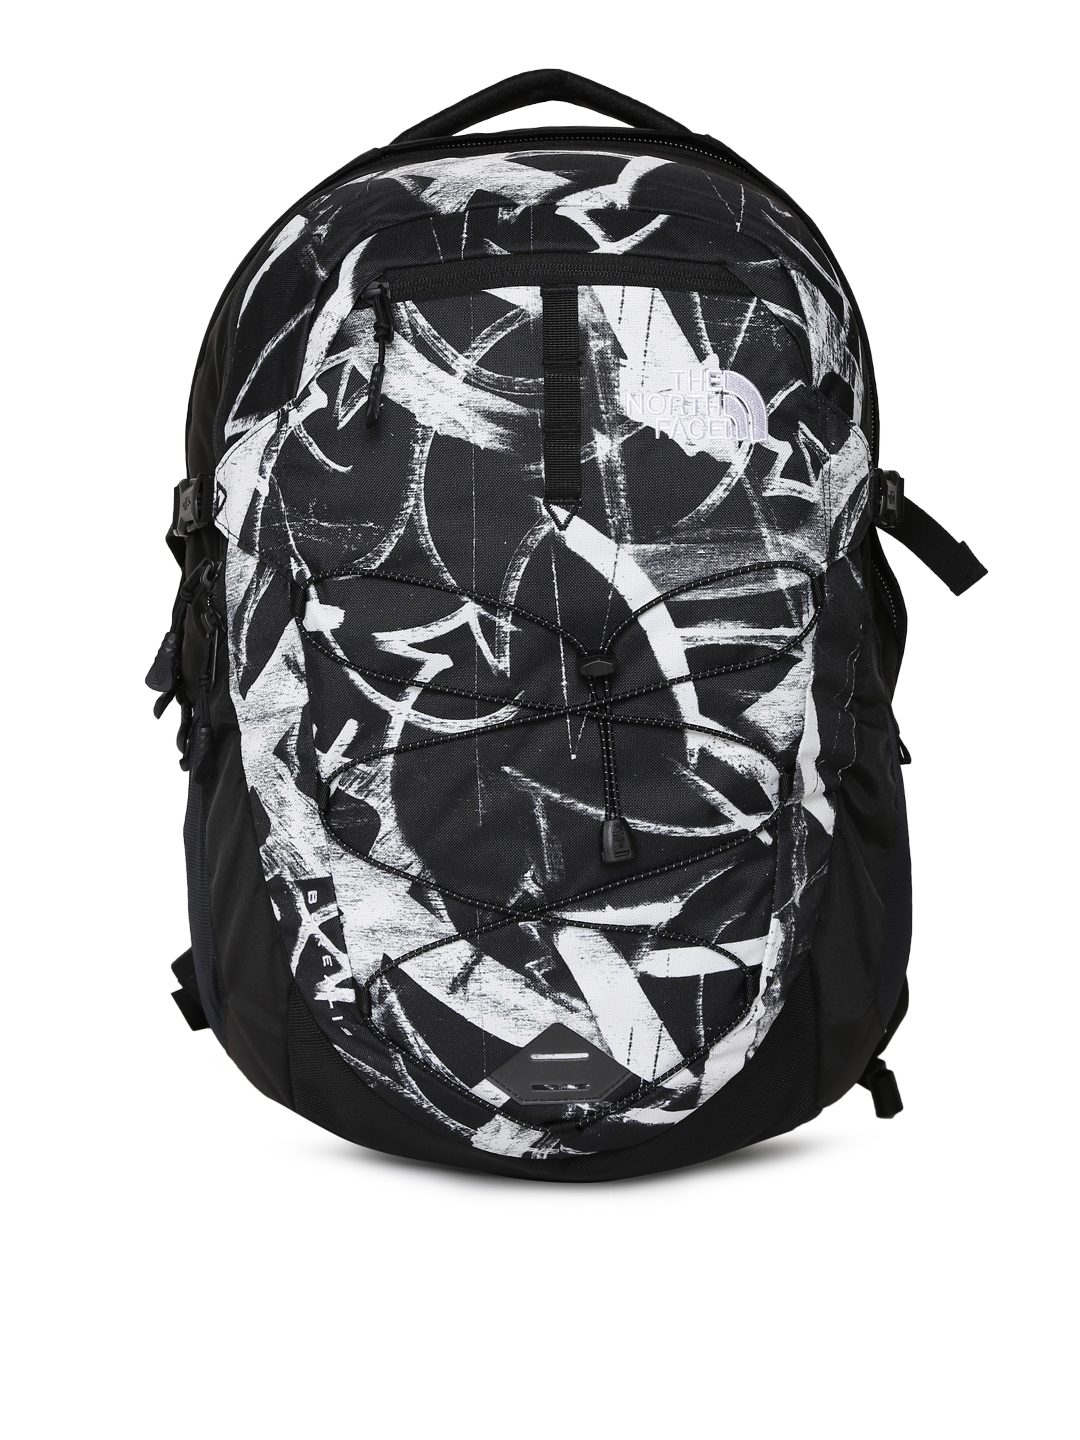 Buy The North Face Unisex Black & White Printed Backpack - Backpacks